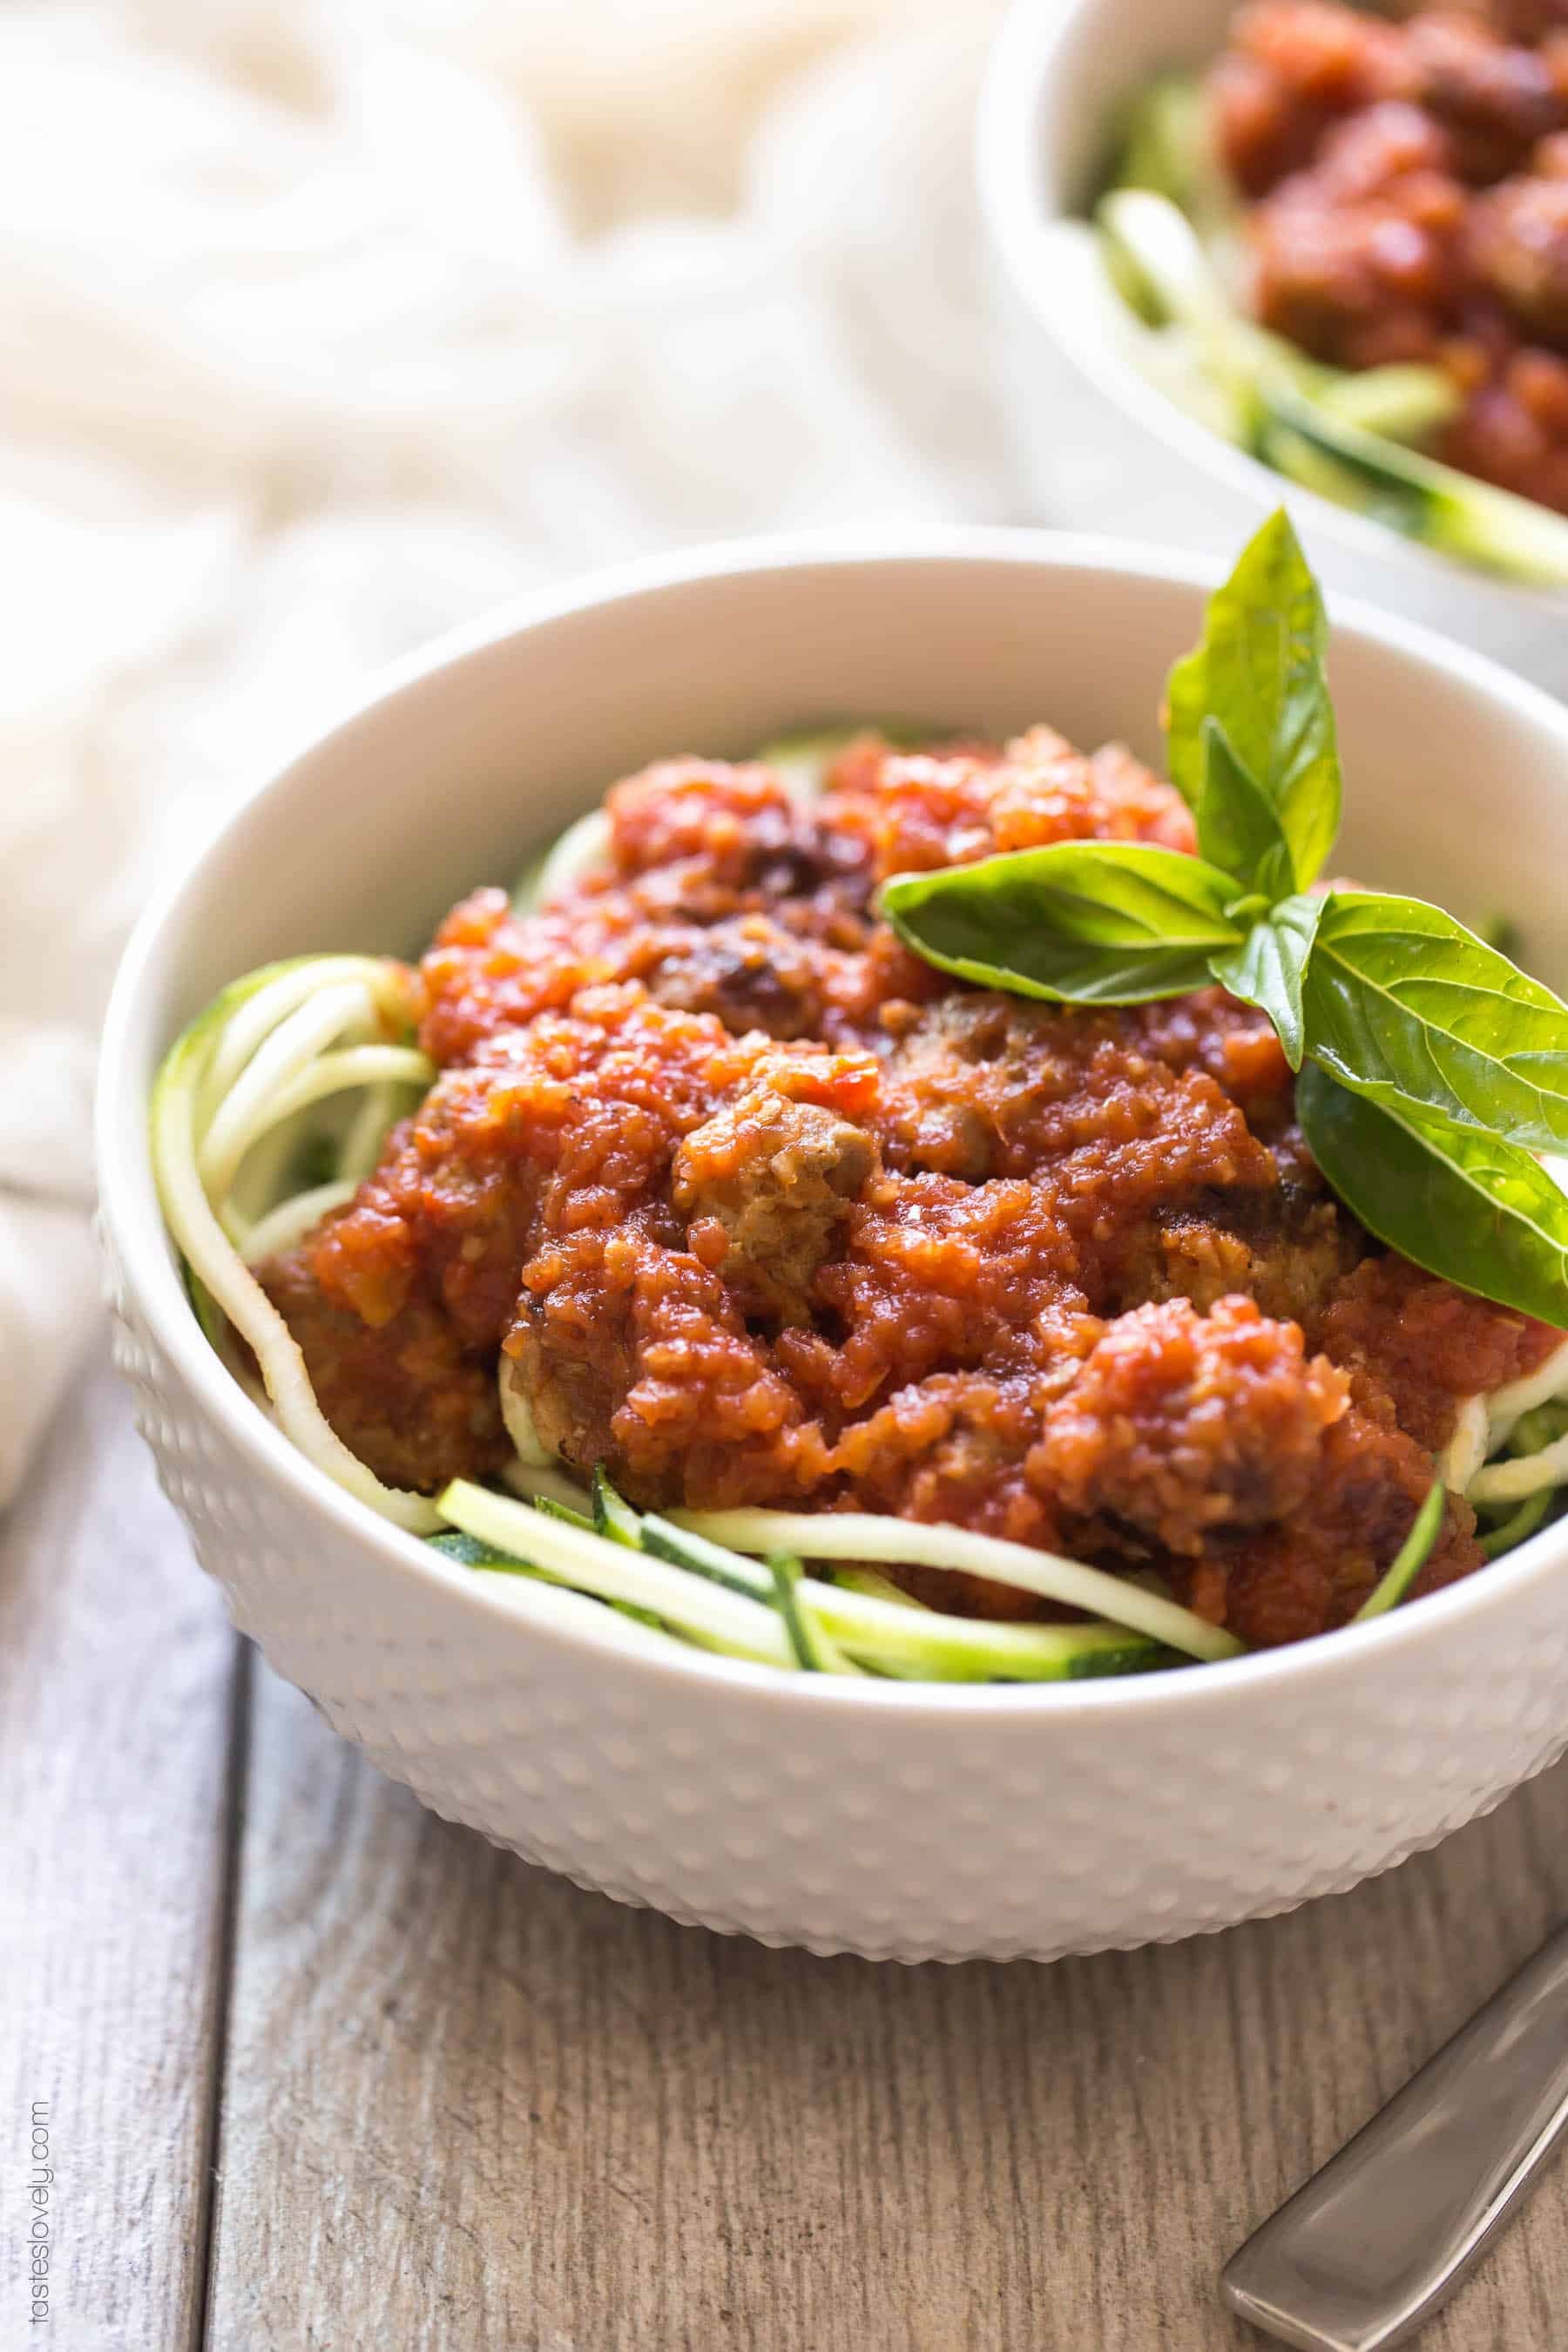 Homemade paleo & Whole30 marinara sauce, made from canned tomatoes with italian sausage. Served over zucchini noodles. A healthy and delicious dinner recipe! Paleo, whole30, gluten free, grain free, dairy free, sugar free, clean eating.